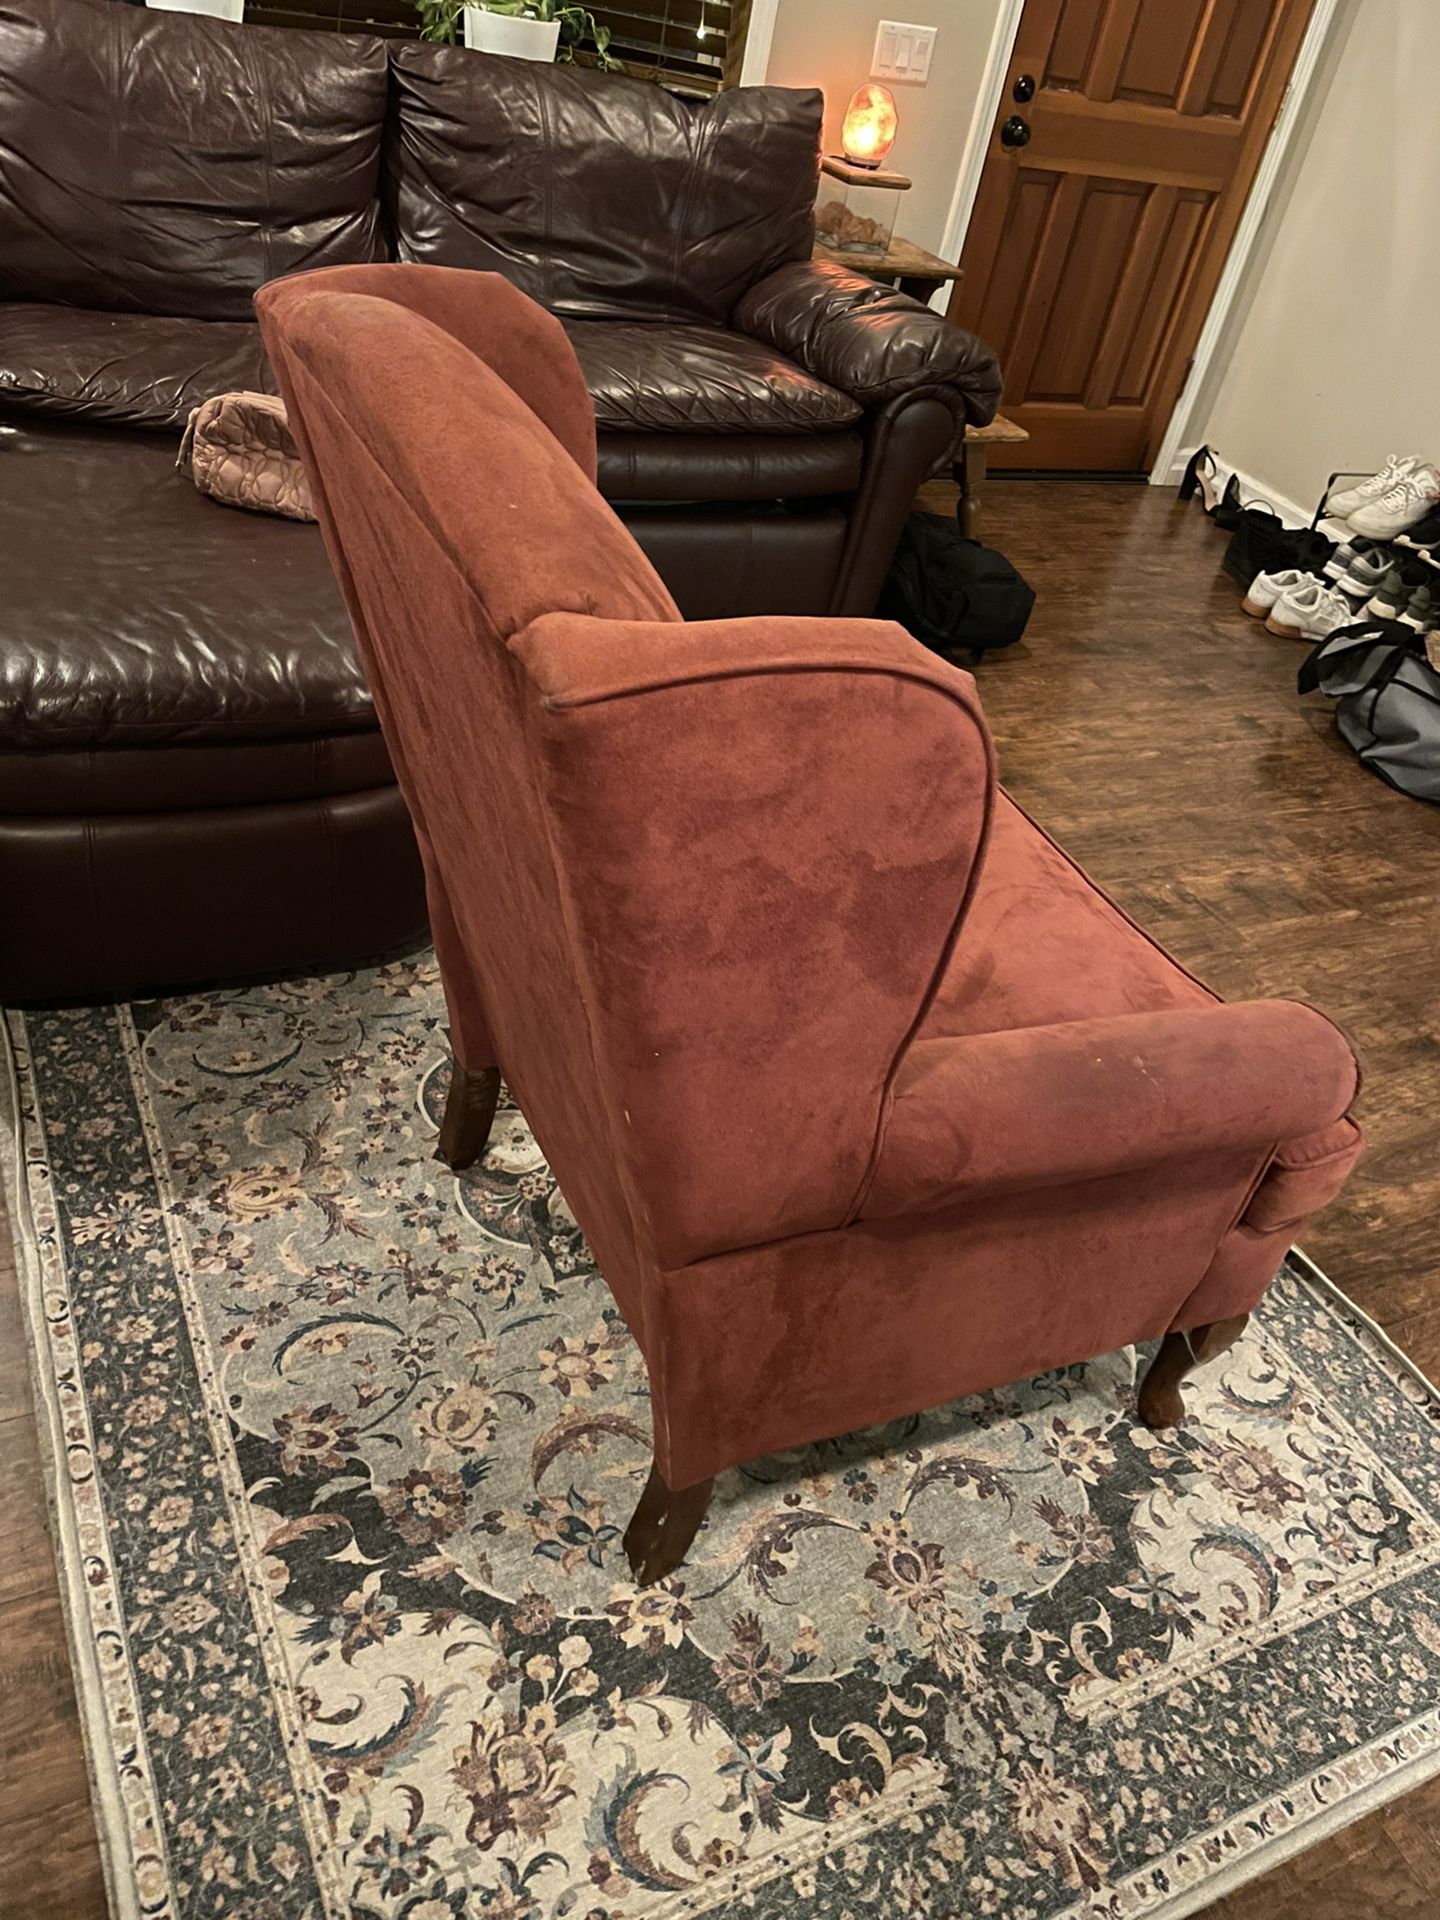 Vintage Wingback Chair $40